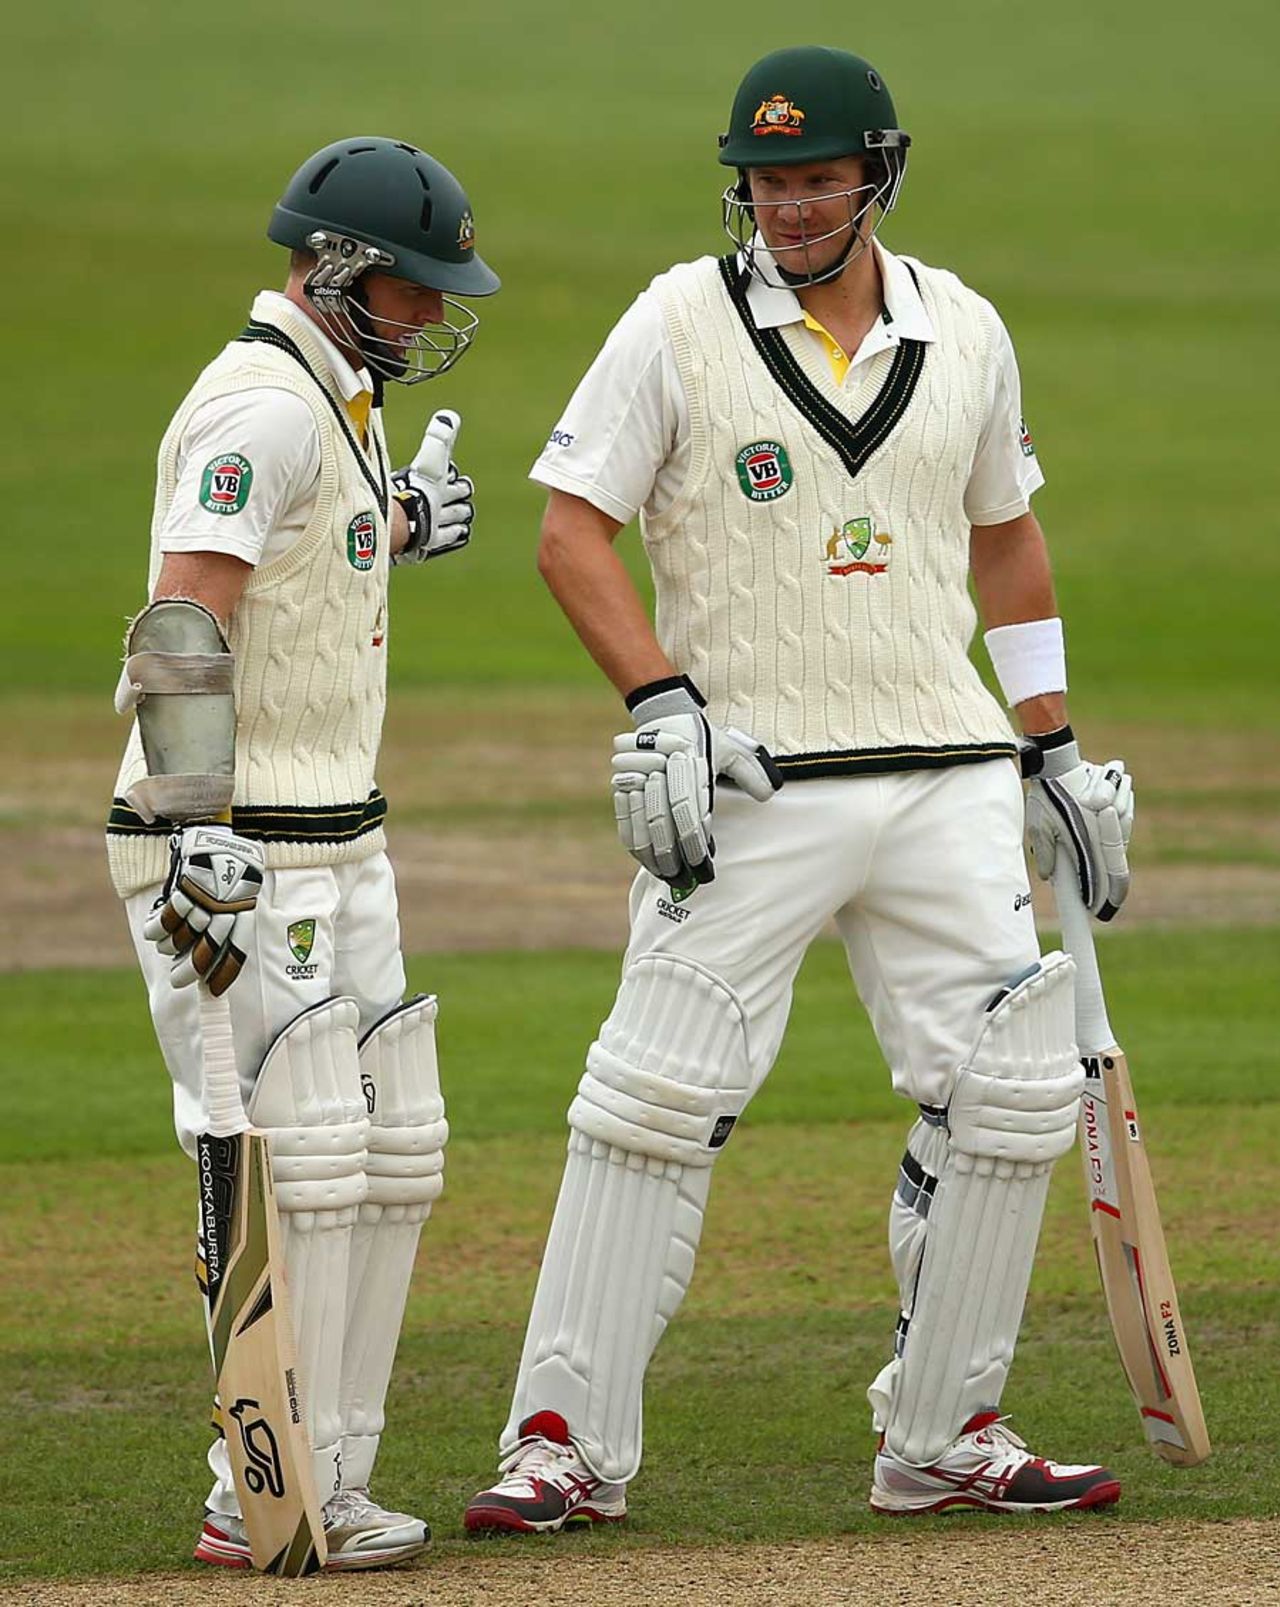 Shane Watson and Chris Rogers will begin the Ashes as Australia's opening pair, Worcestershire v Australians, Tour Match, New Road, 1st day, July 2, 2013